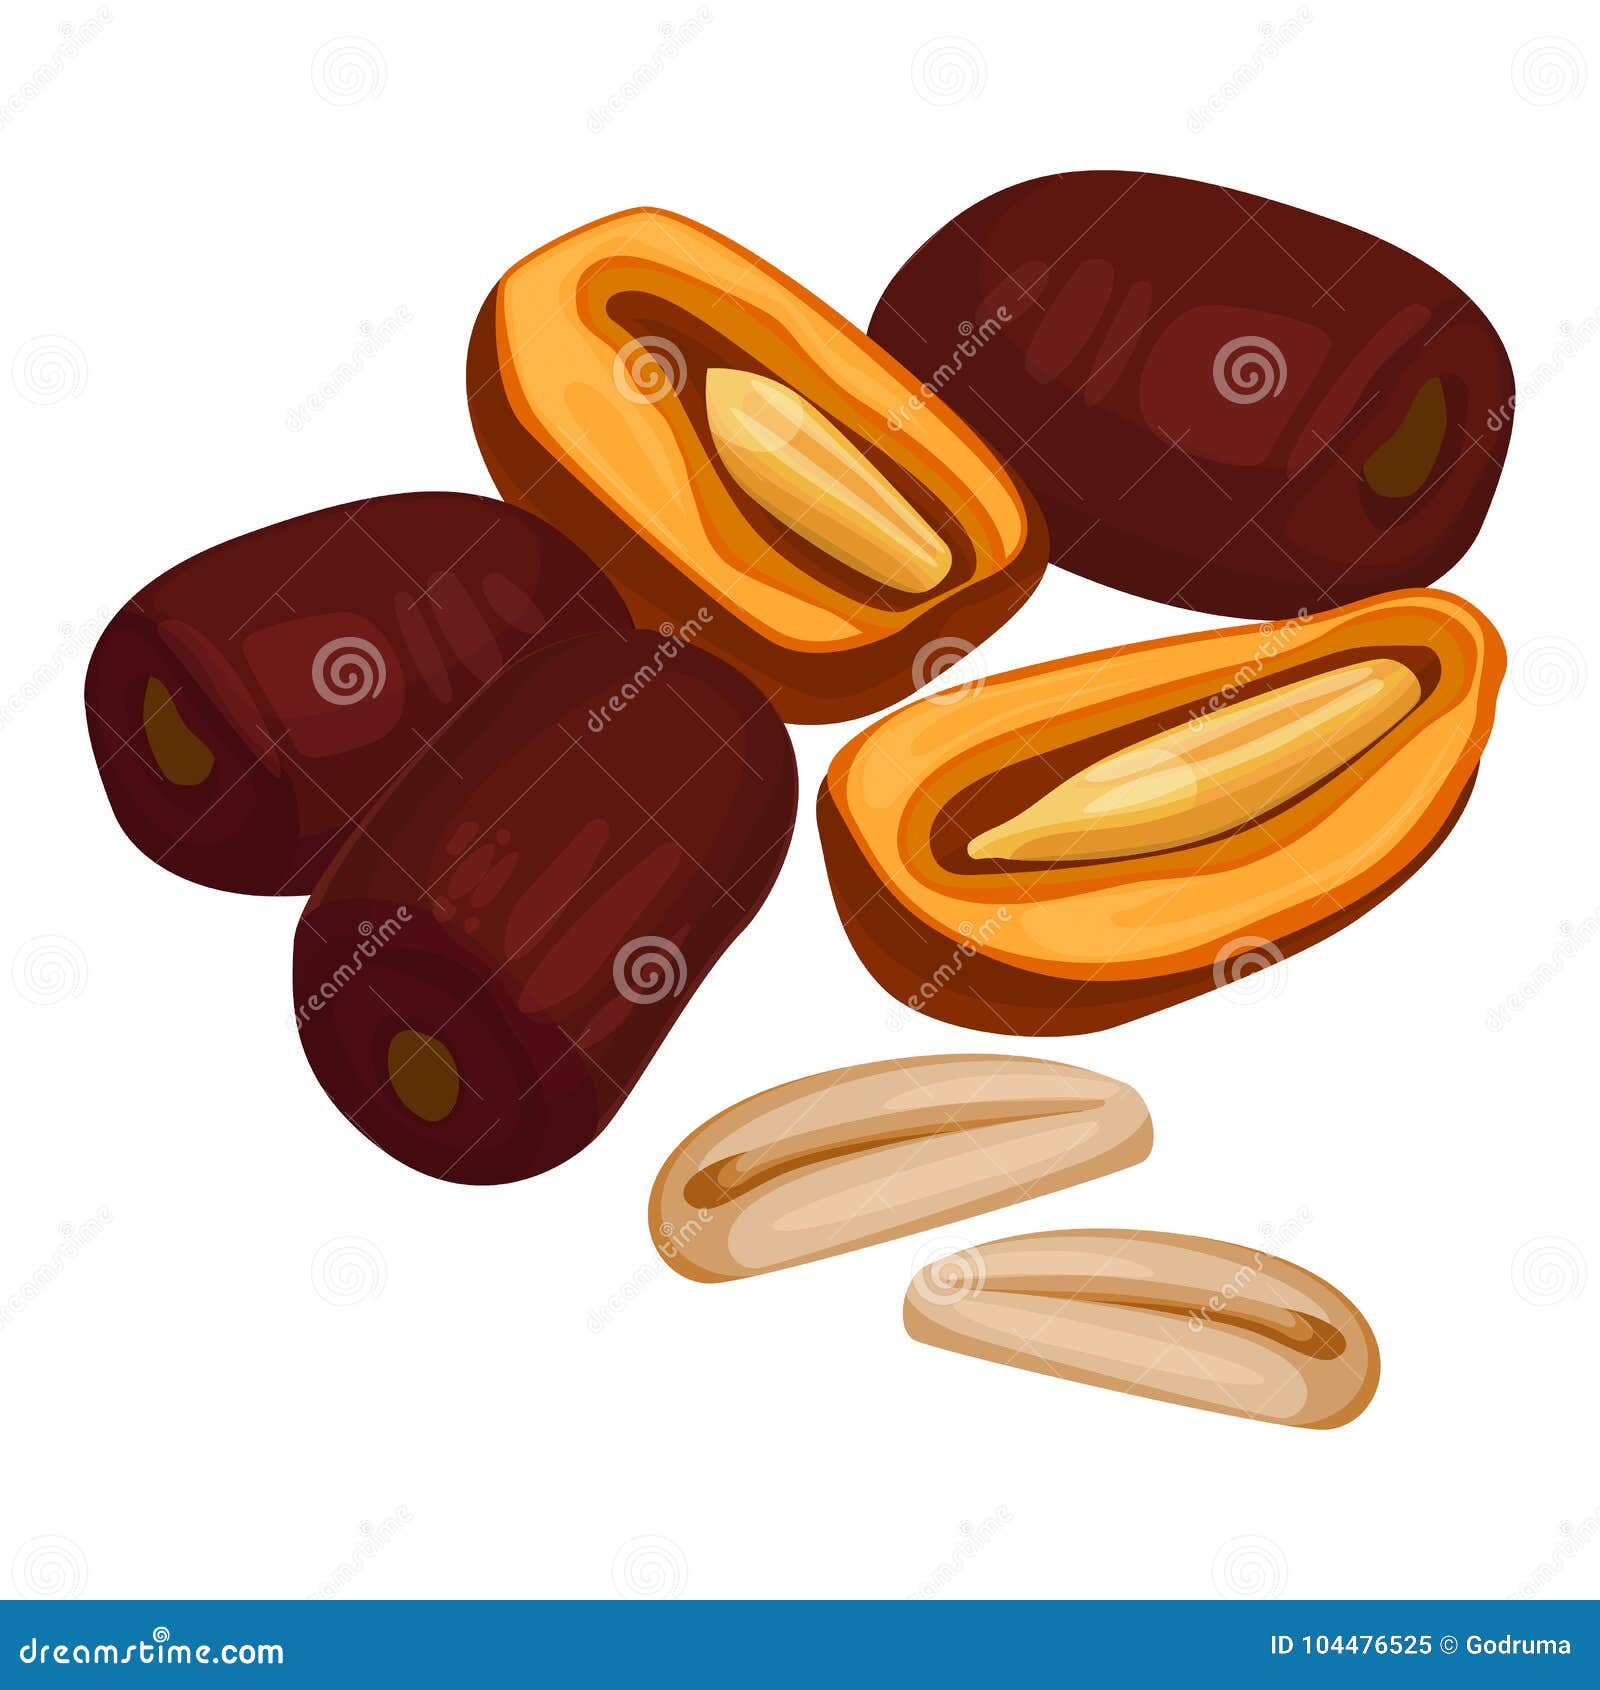 delicious sweet healthy dates fruits with oblong ossicles